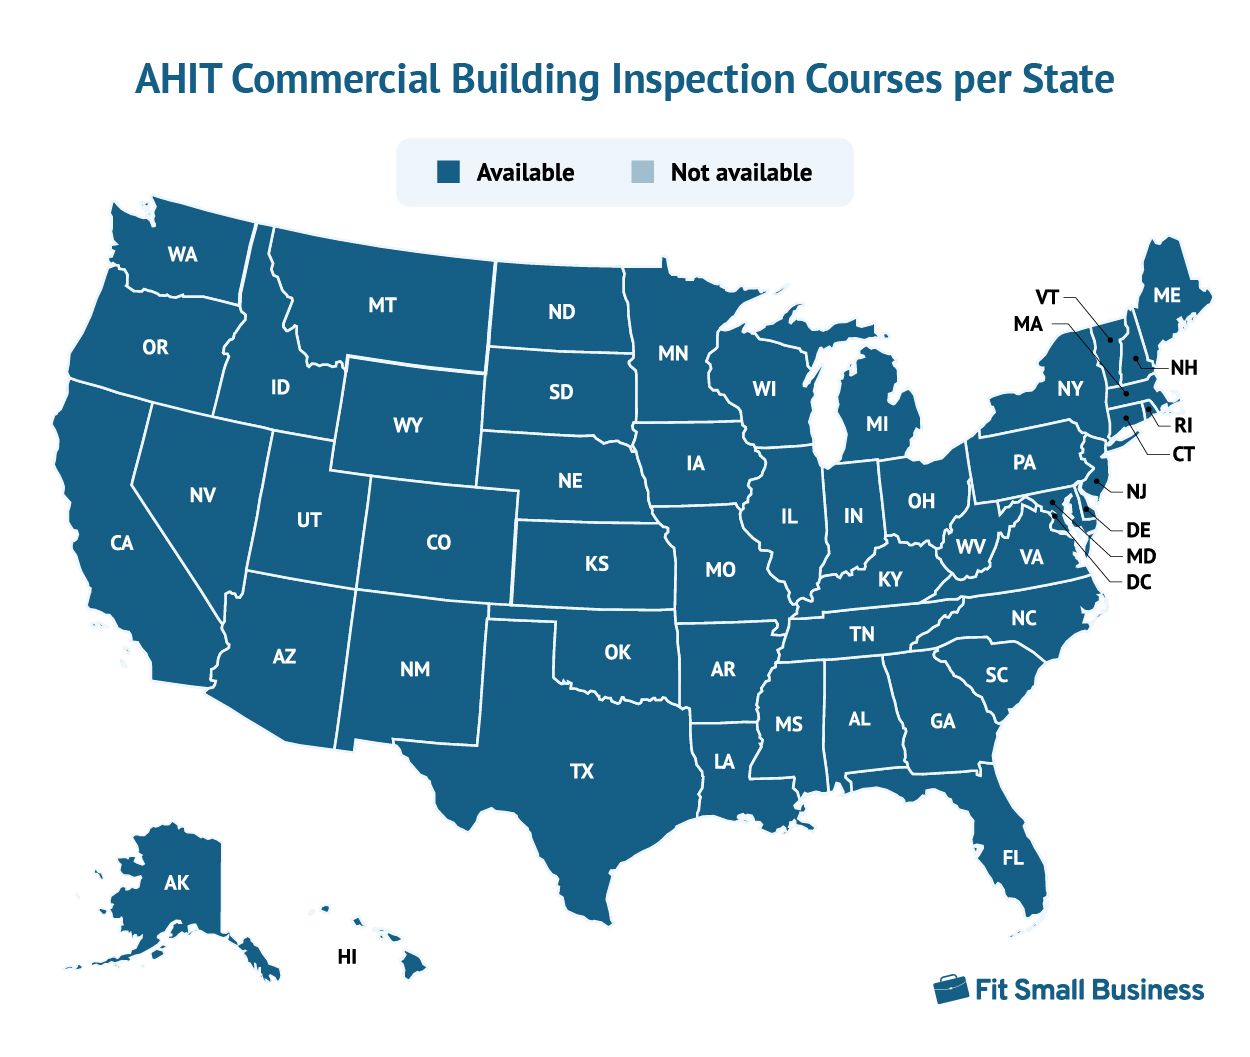 The map showing for a AHIT Commercial Building Inspection Courses per State.